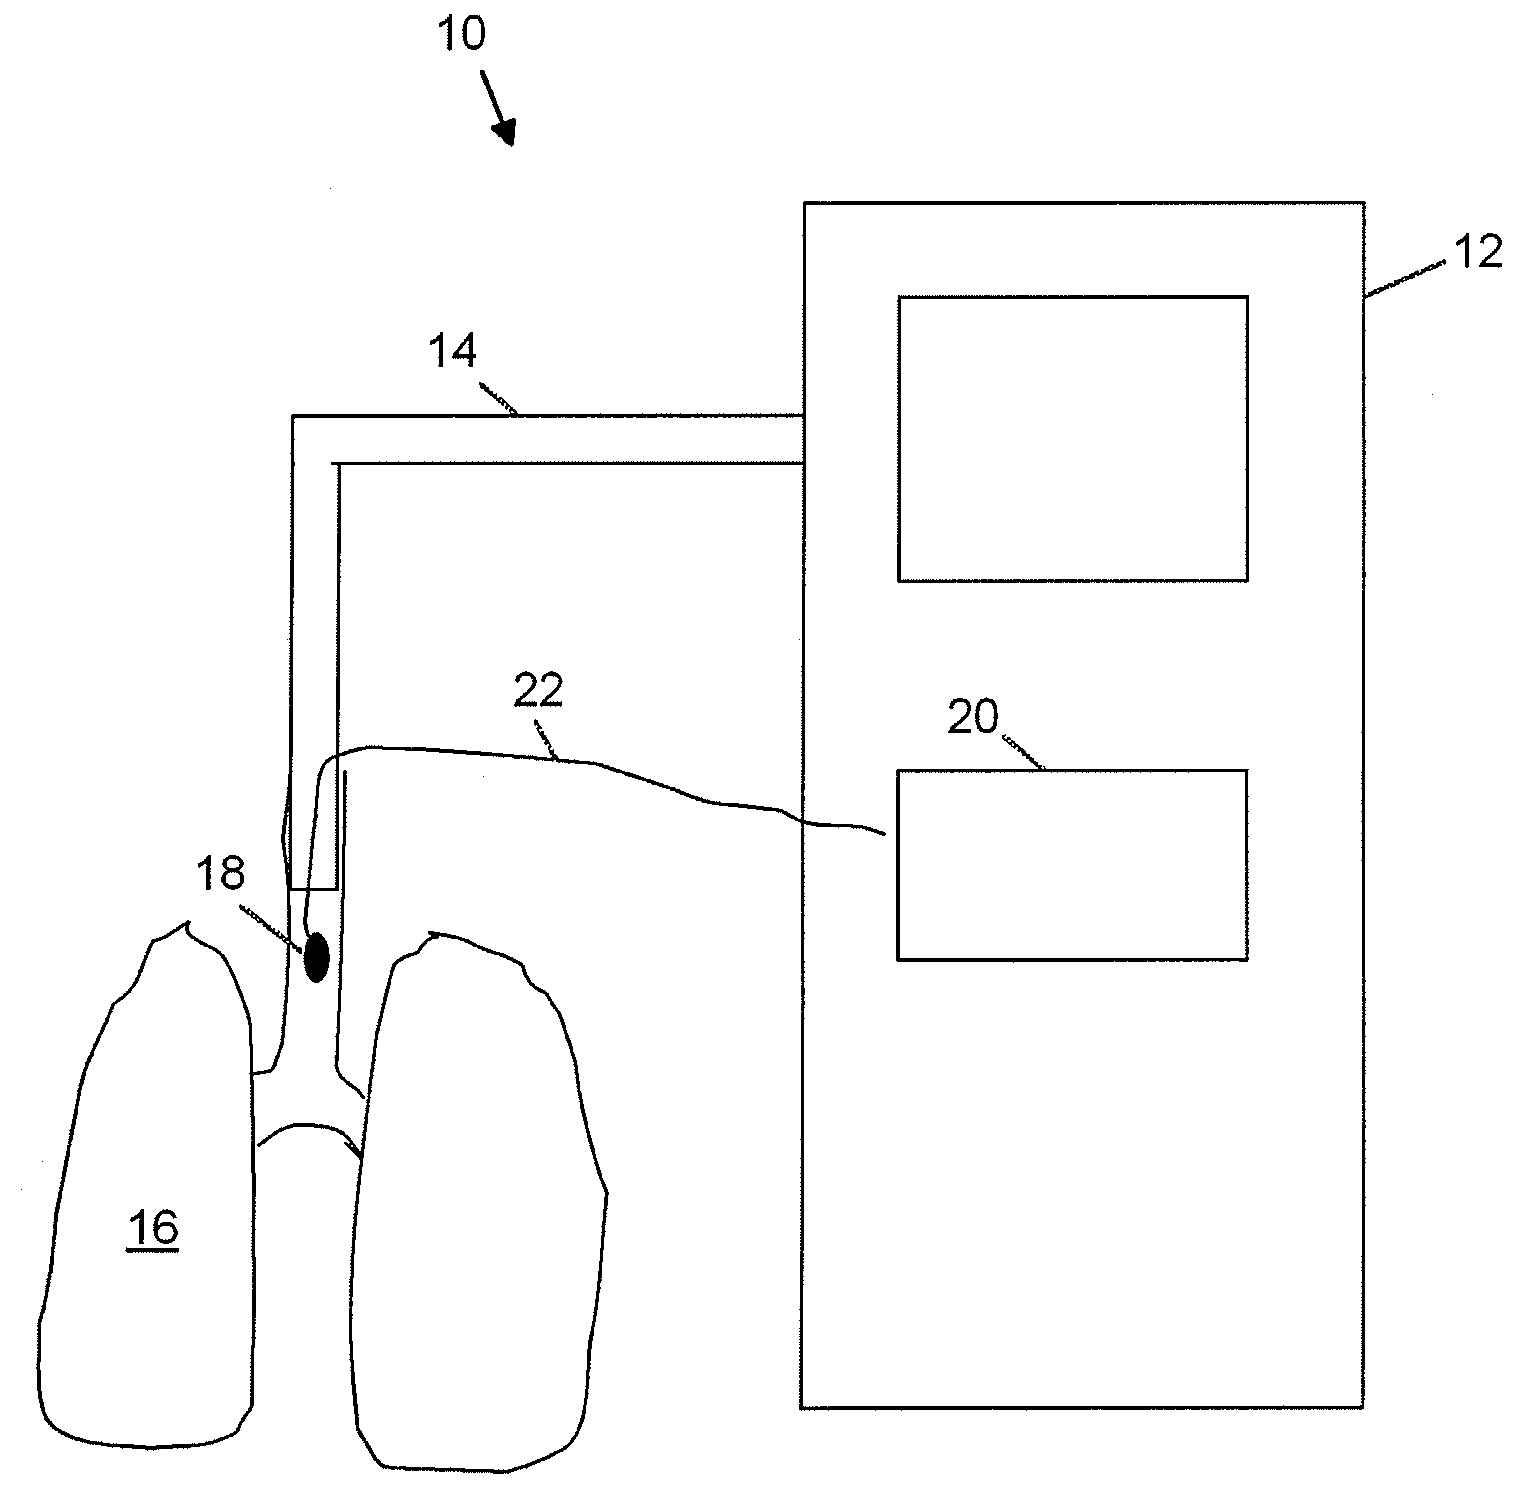 Apparatus, System and Method for Assessing Alveolar Inflation